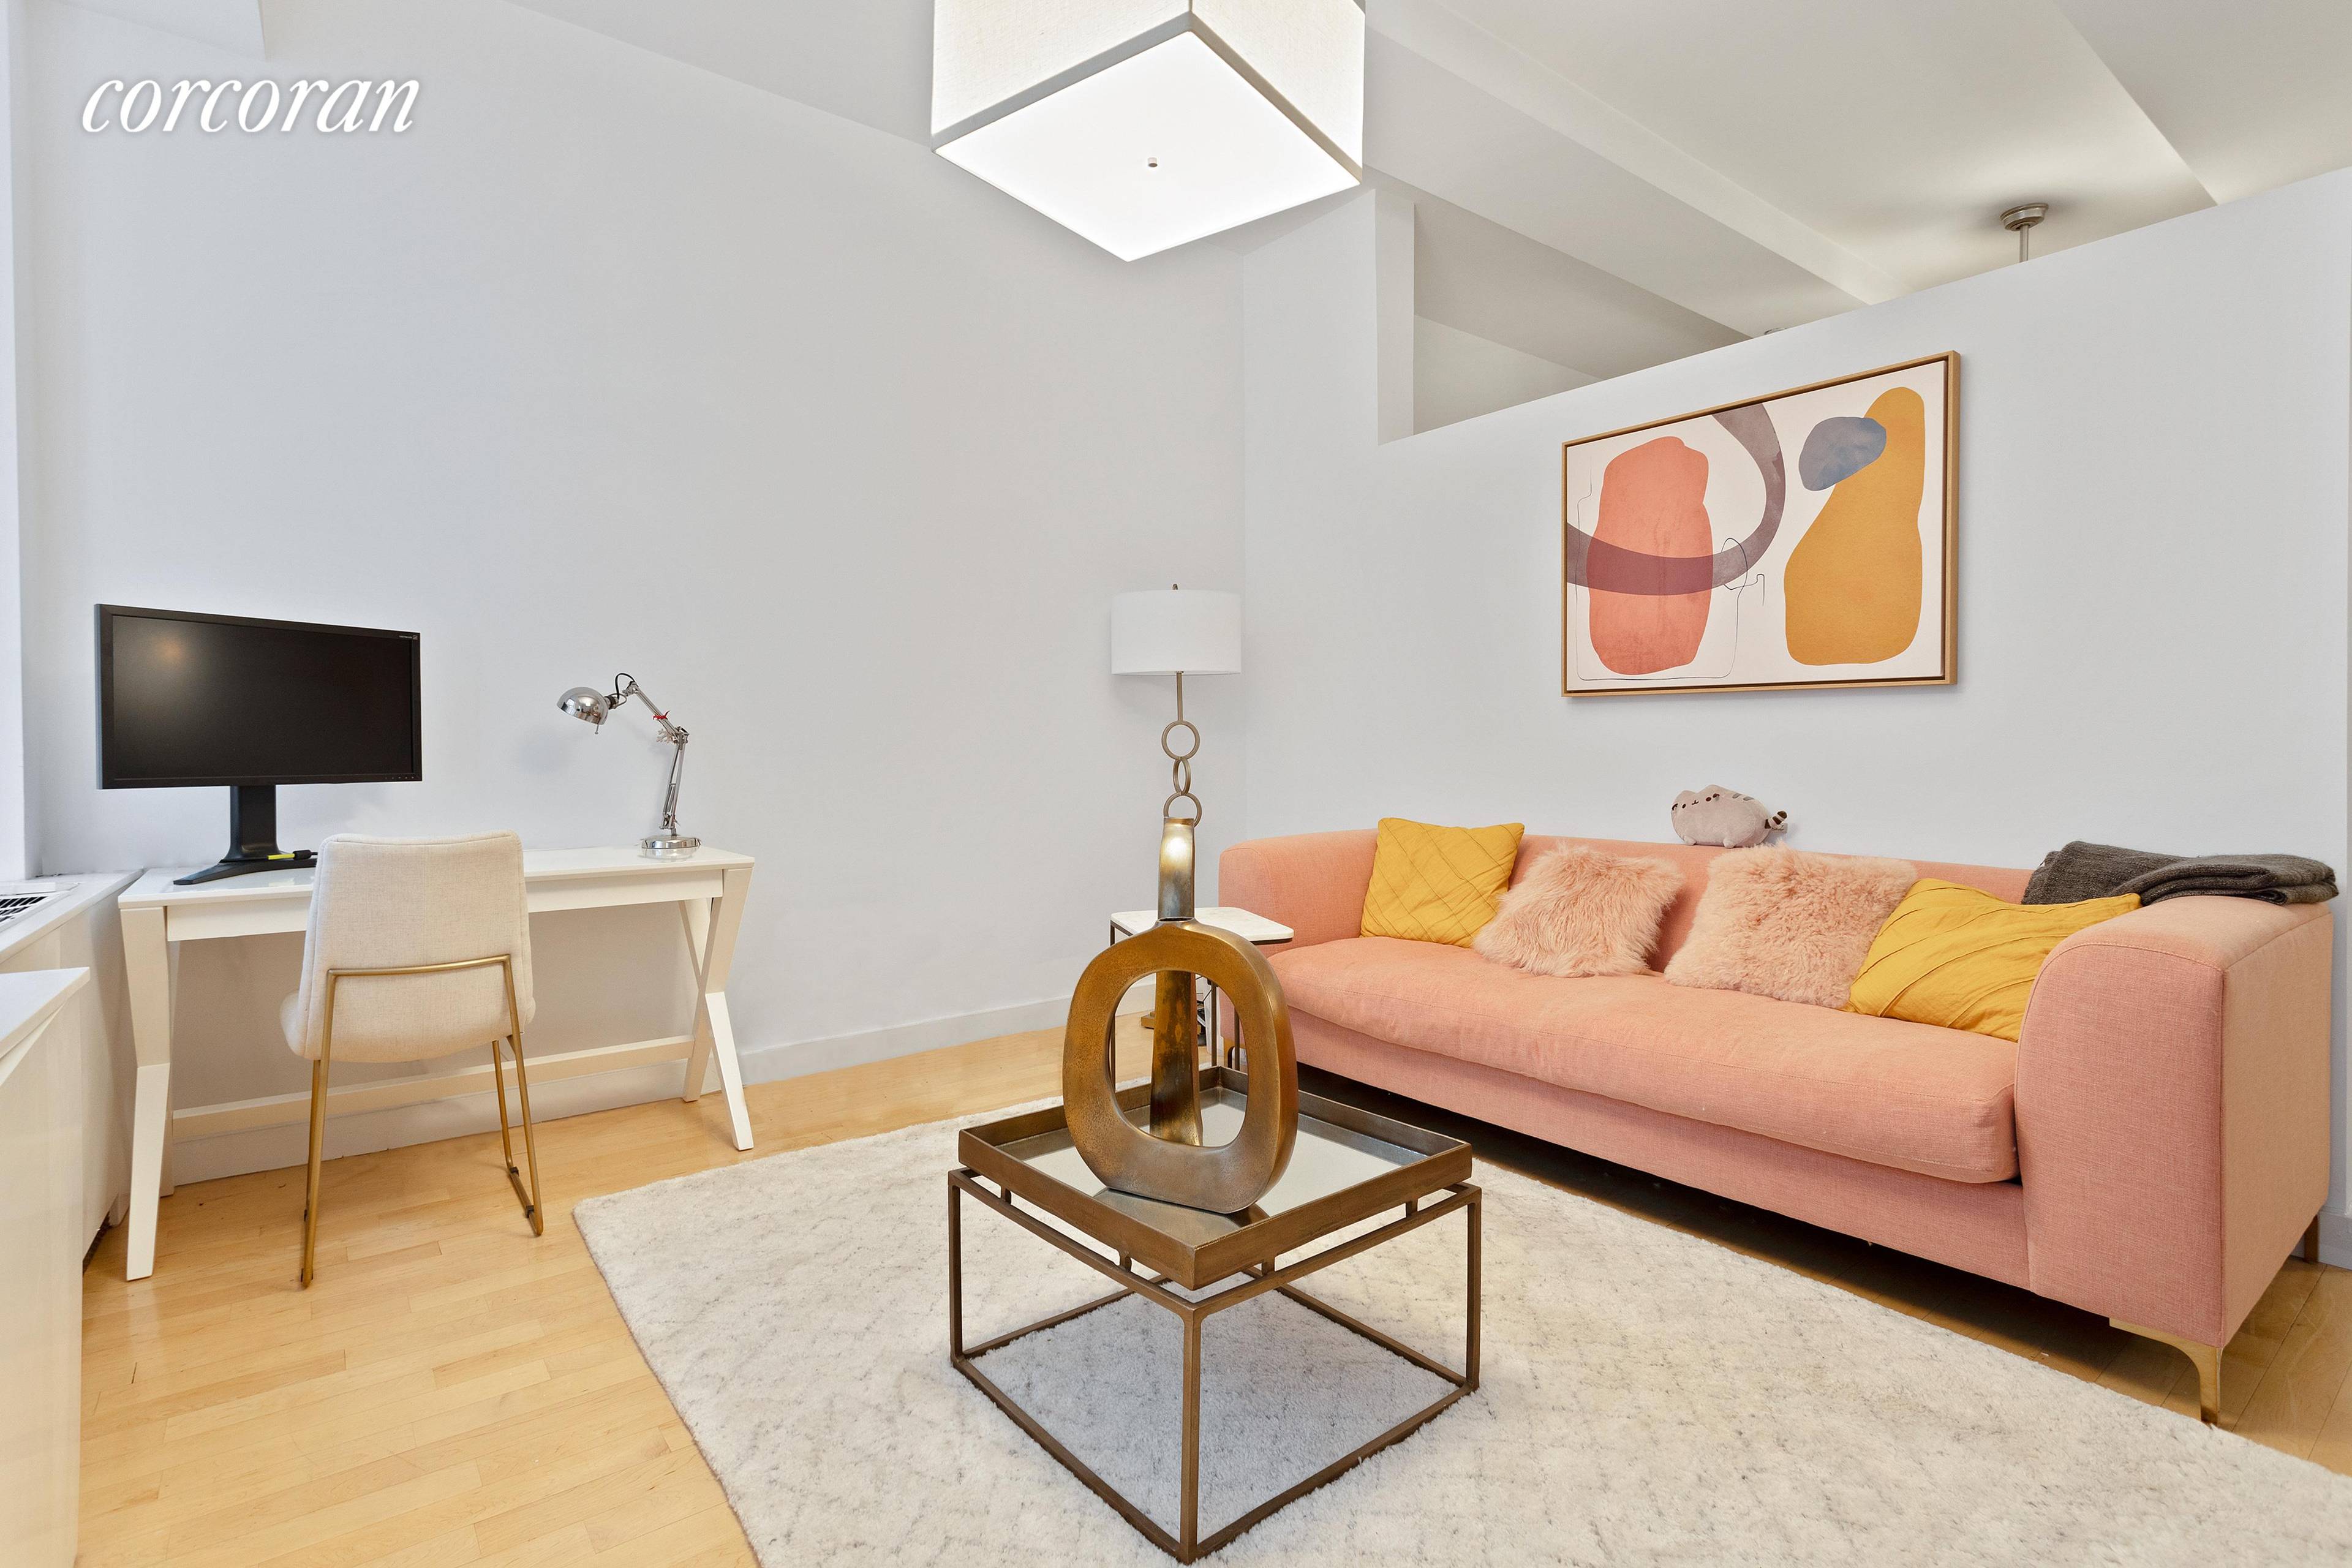 December rent is FREE ! Welcome to Loft 1422 at 15 Broad, known as Downtown by Philippe Starck !